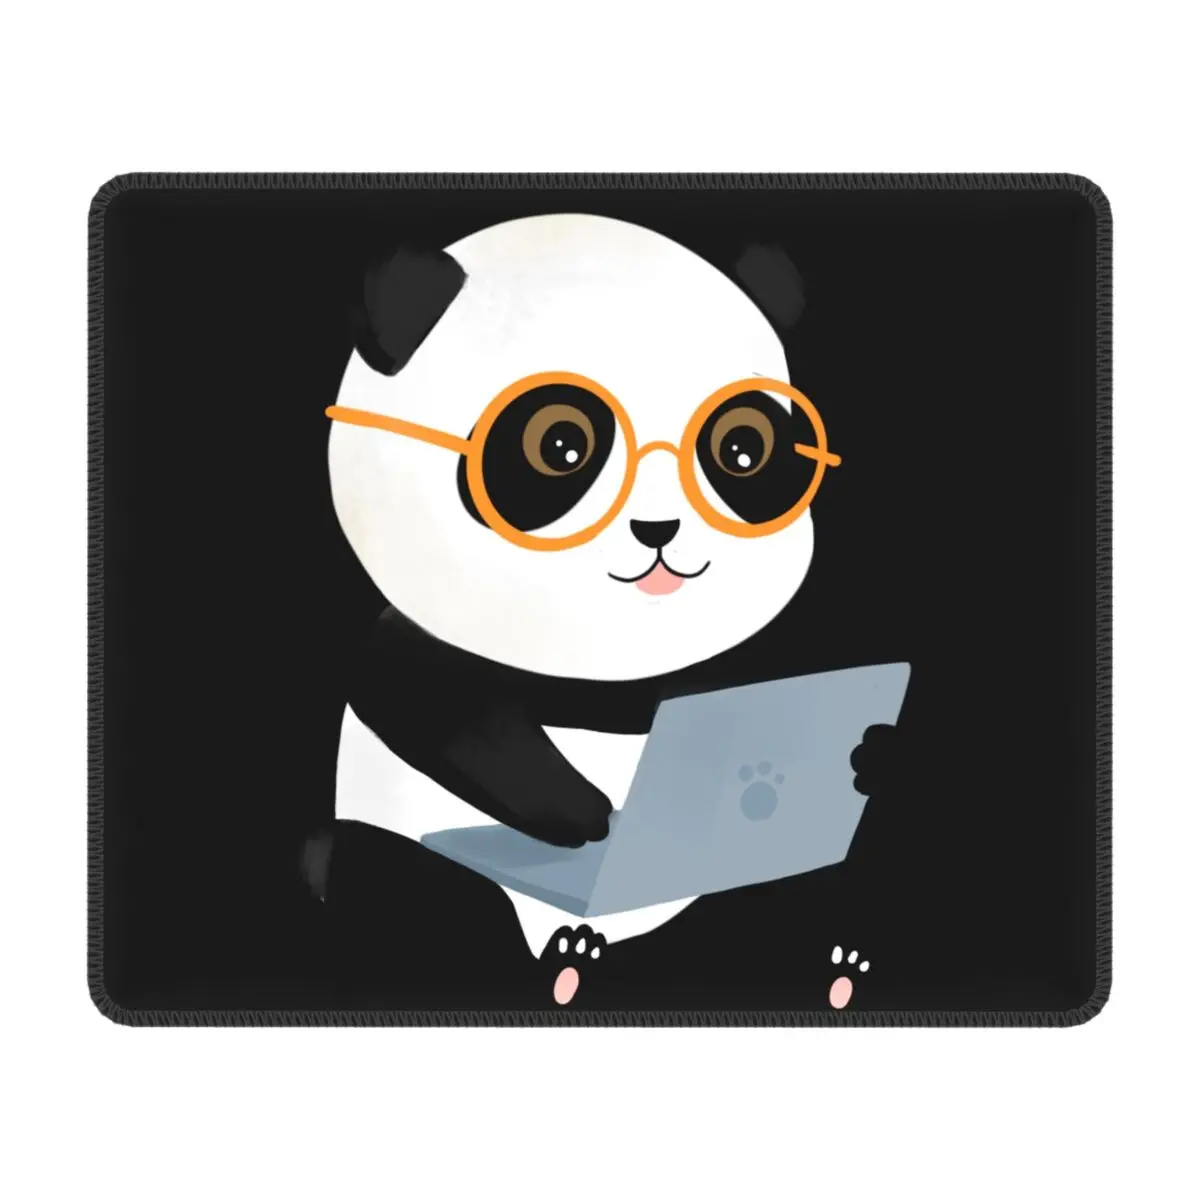 Giant Panda Work Mouse Pad Rubber Mousepad With Stitched Edges for Gaming Office Laptop Computer PC Cute Animal Bear Mouse Mat